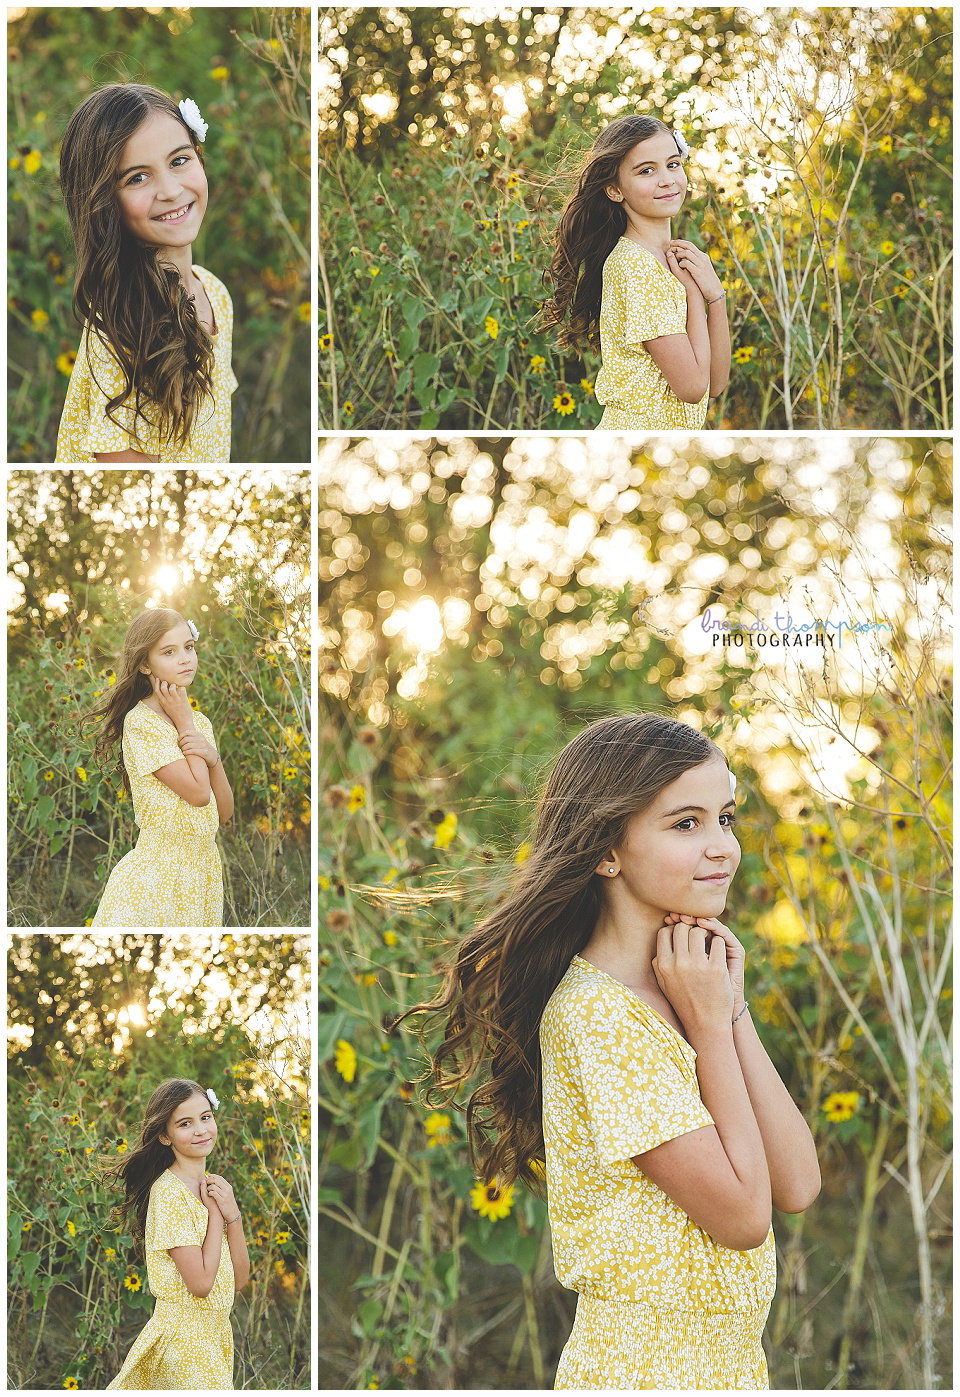 photos outside in front of tall grass and sunflowers with a sunset backround. A white tween girl with long brown hair in a yellow dress and a variety of poses.